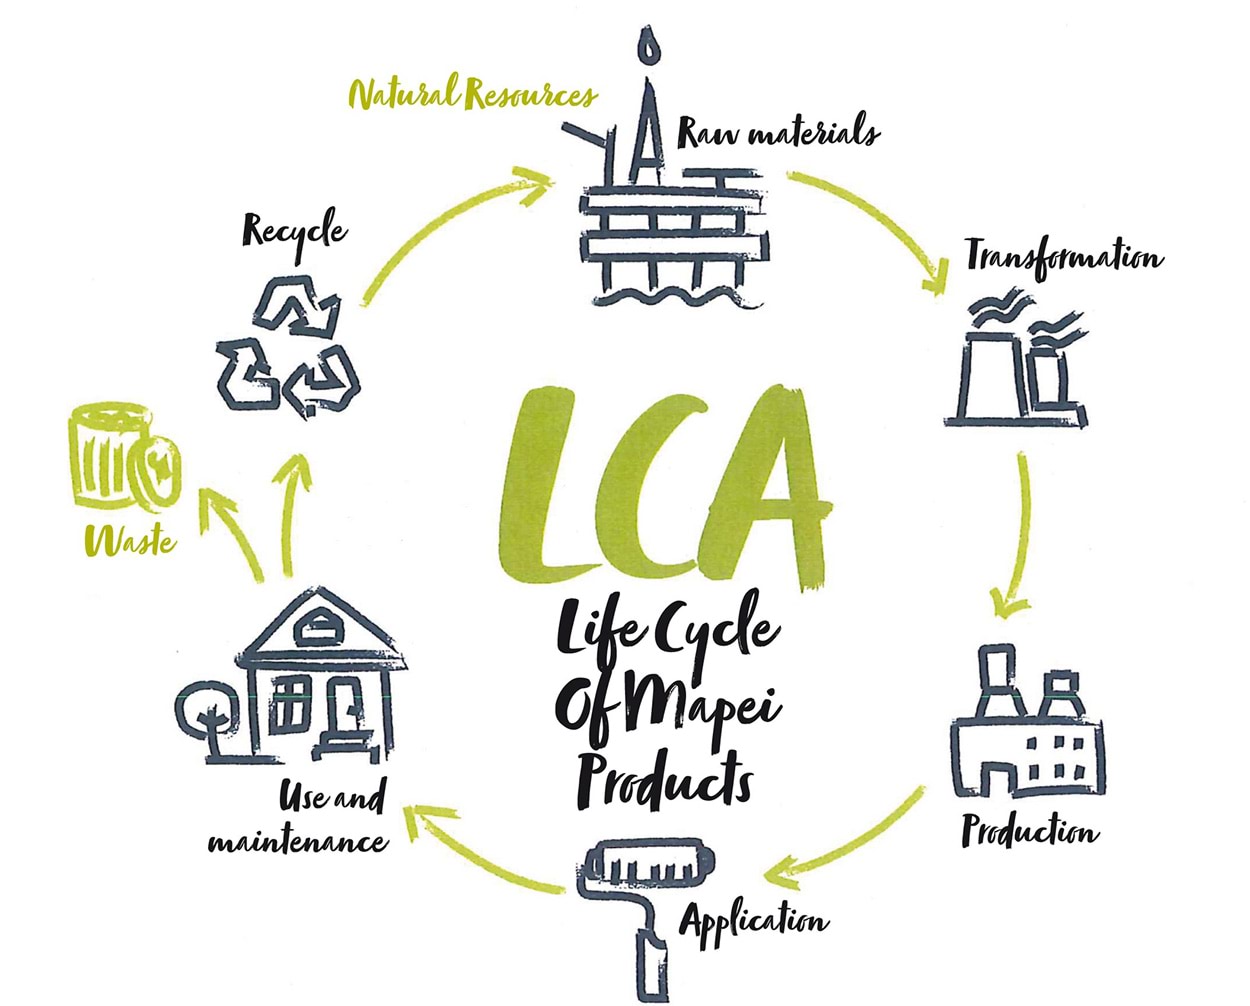 LCA Life Cycle of Mapei Products - Life Cycle Assessment